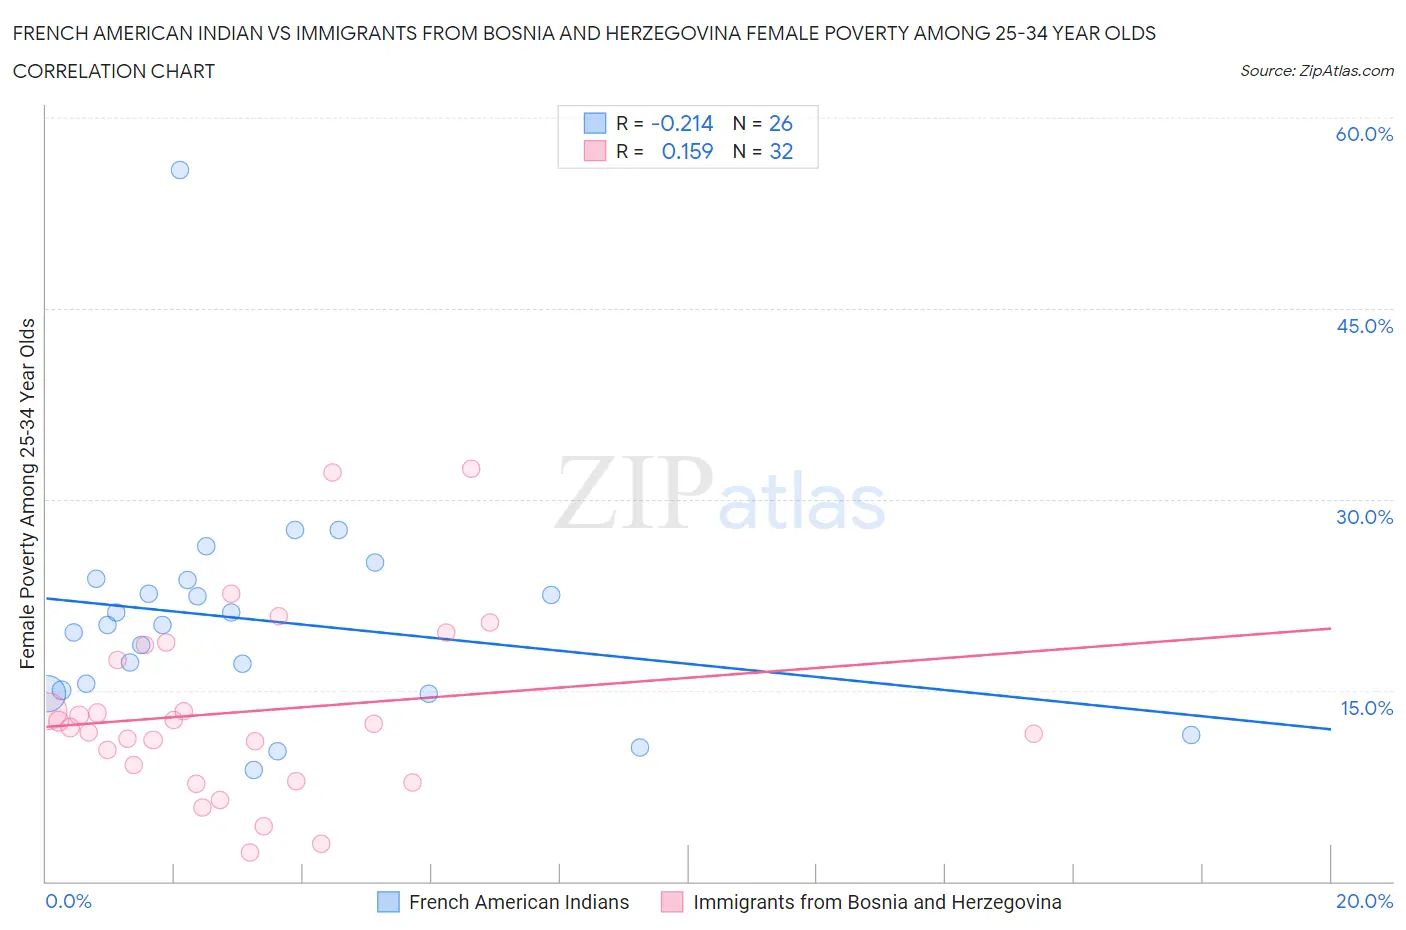 French American Indian vs Immigrants from Bosnia and Herzegovina Female Poverty Among 25-34 Year Olds